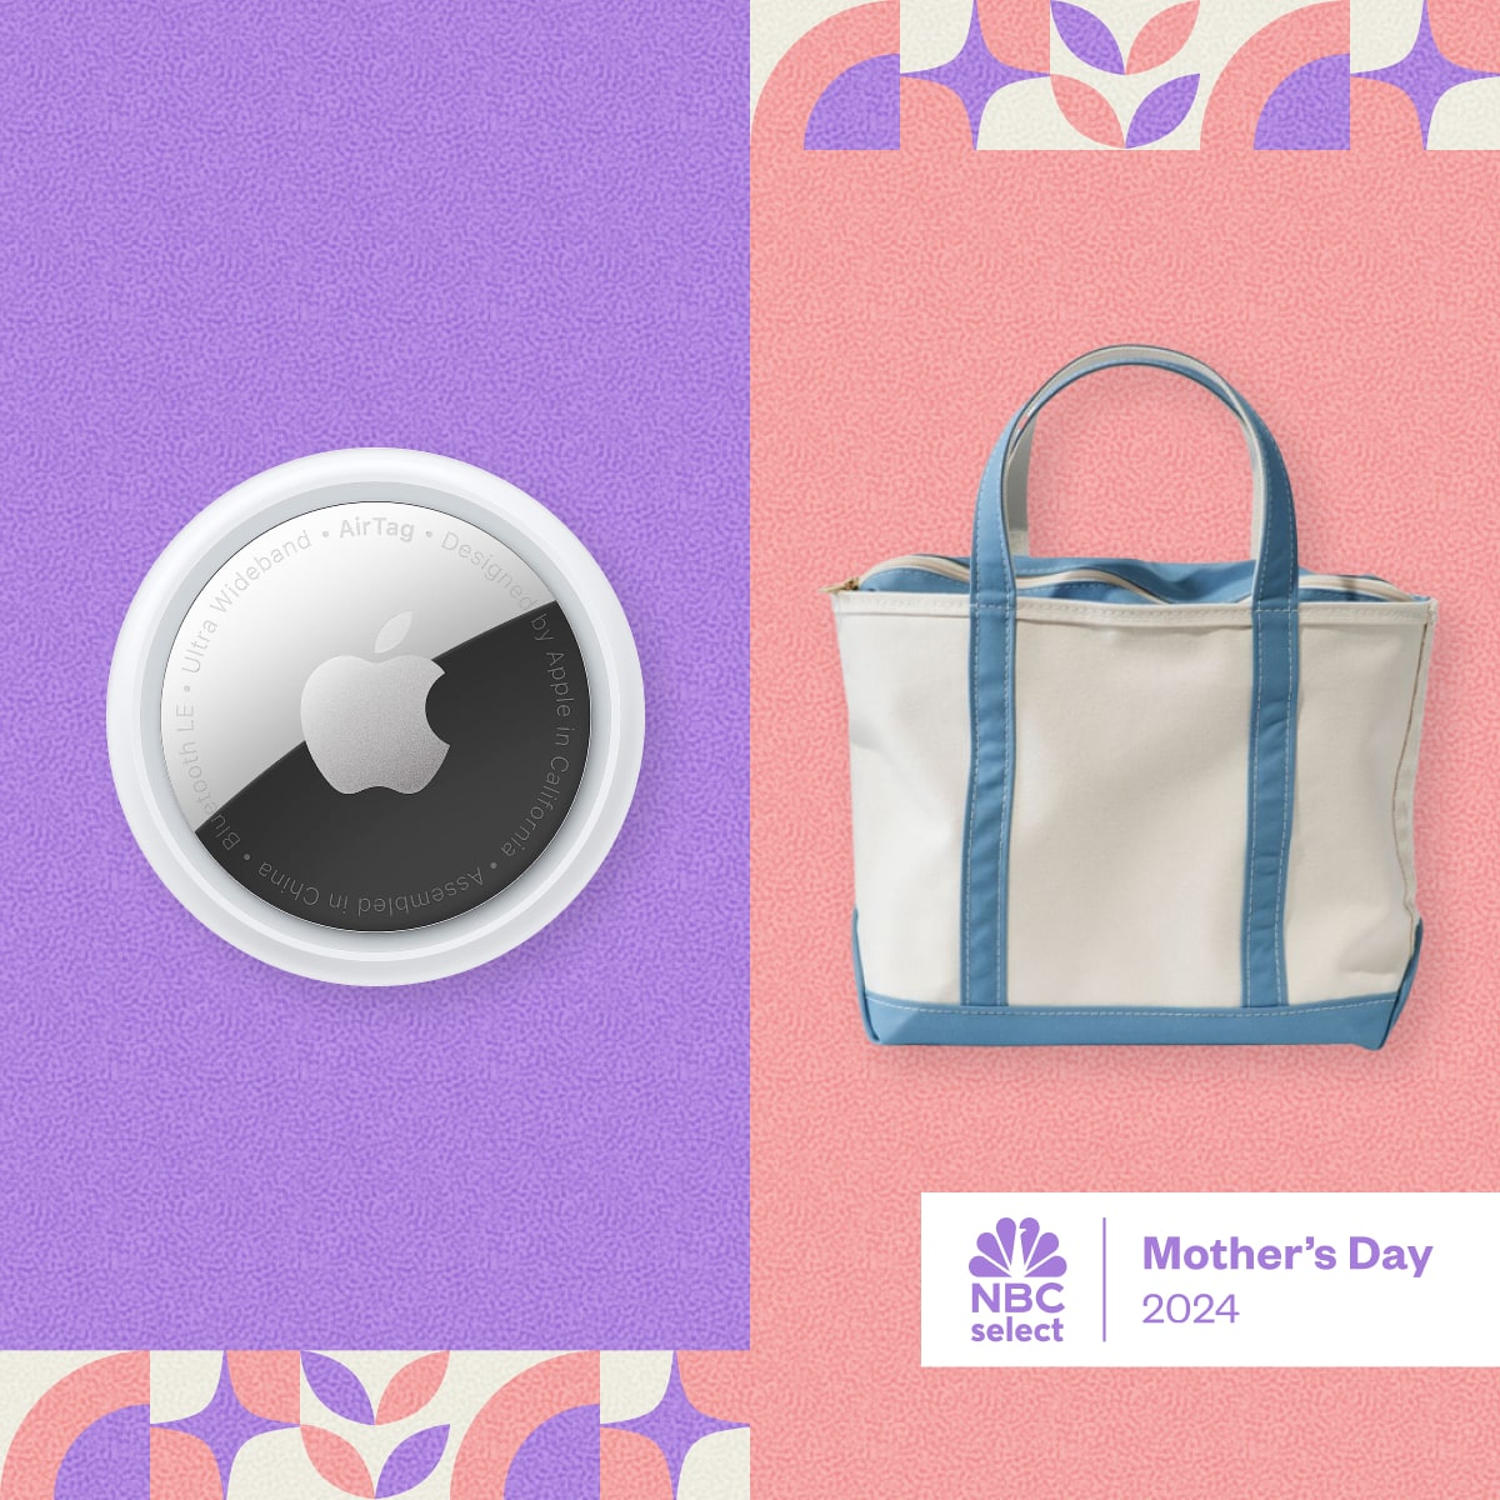 Mother's Day gifts for every kind of mom